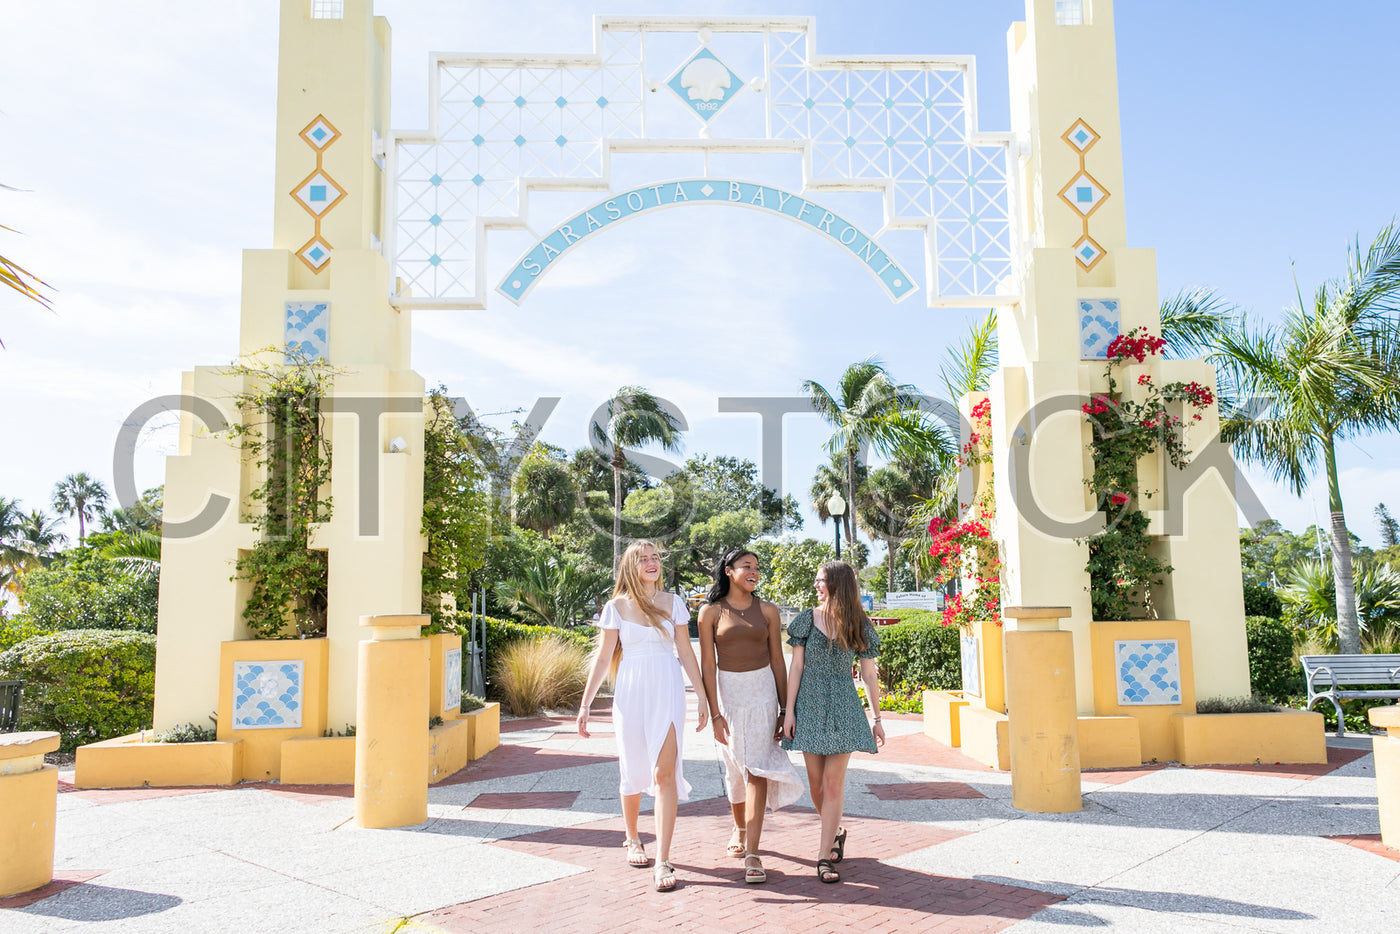 Three friends laughing and walking under Sarasota Bayfront arch